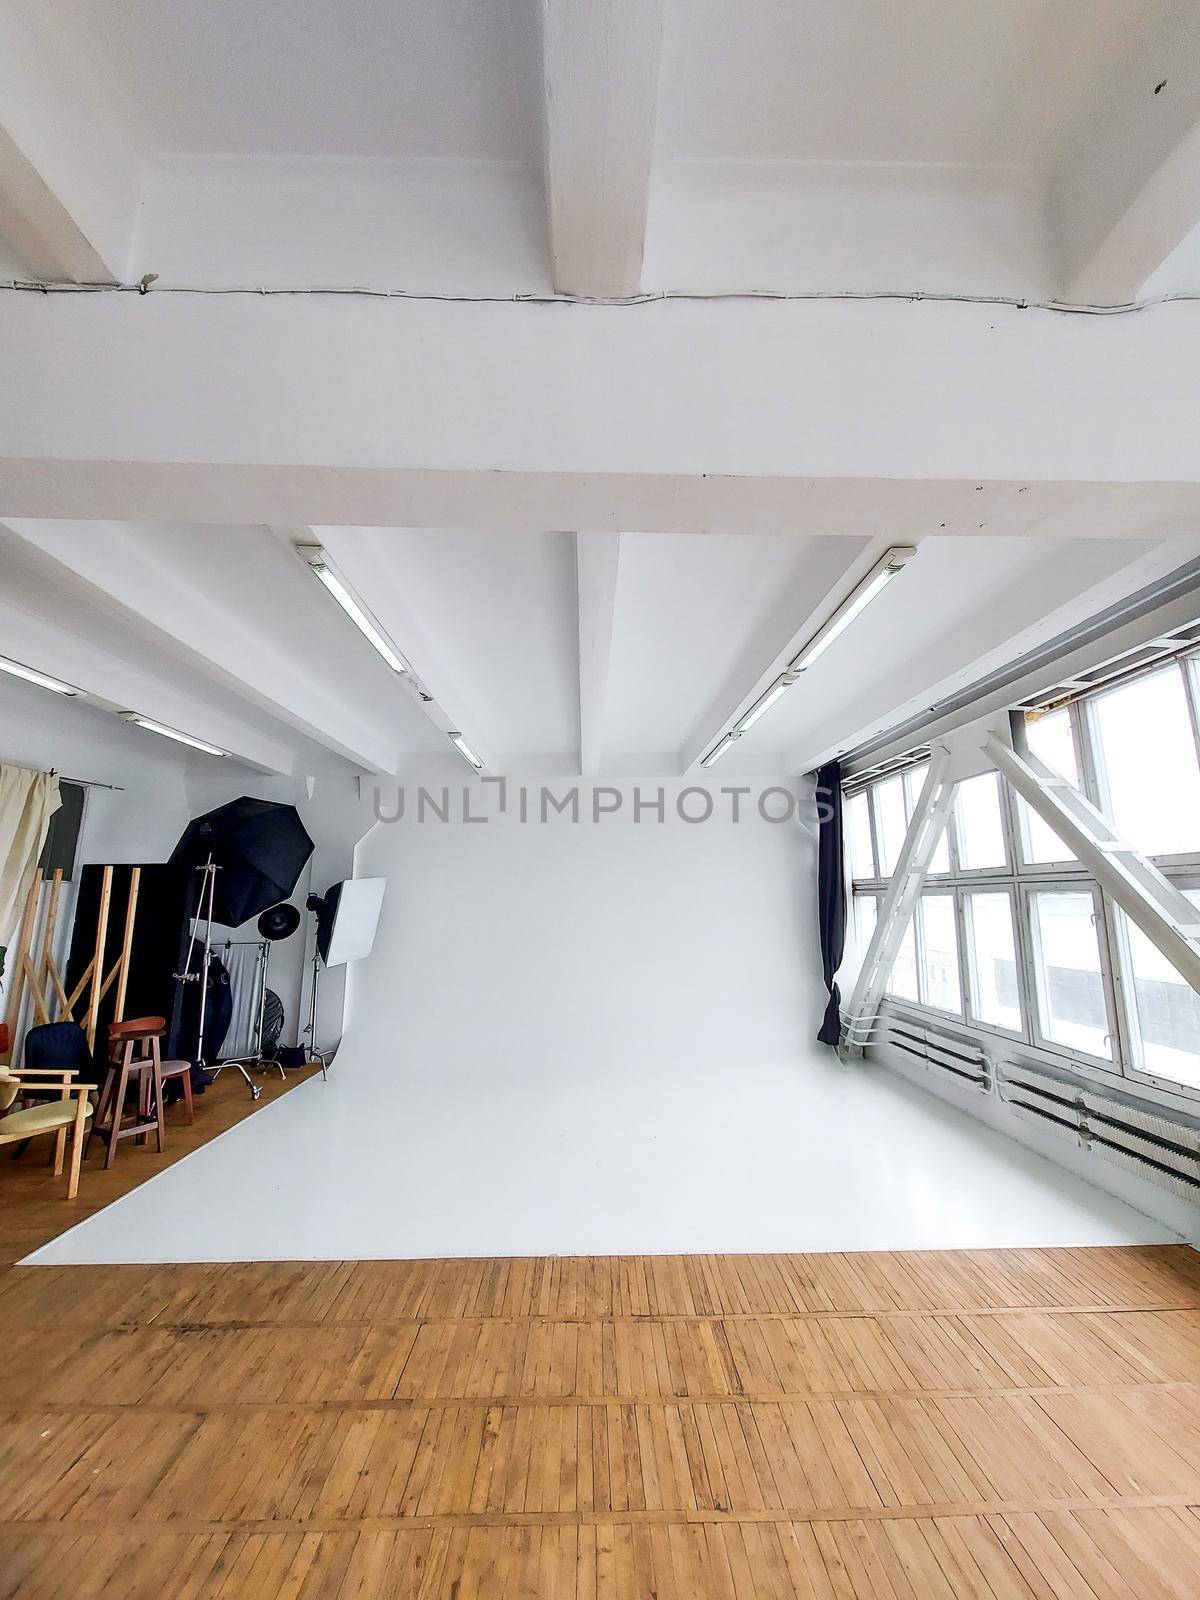 Large daylight photo studio with cyclorama and large panoramic windows. by vovsht